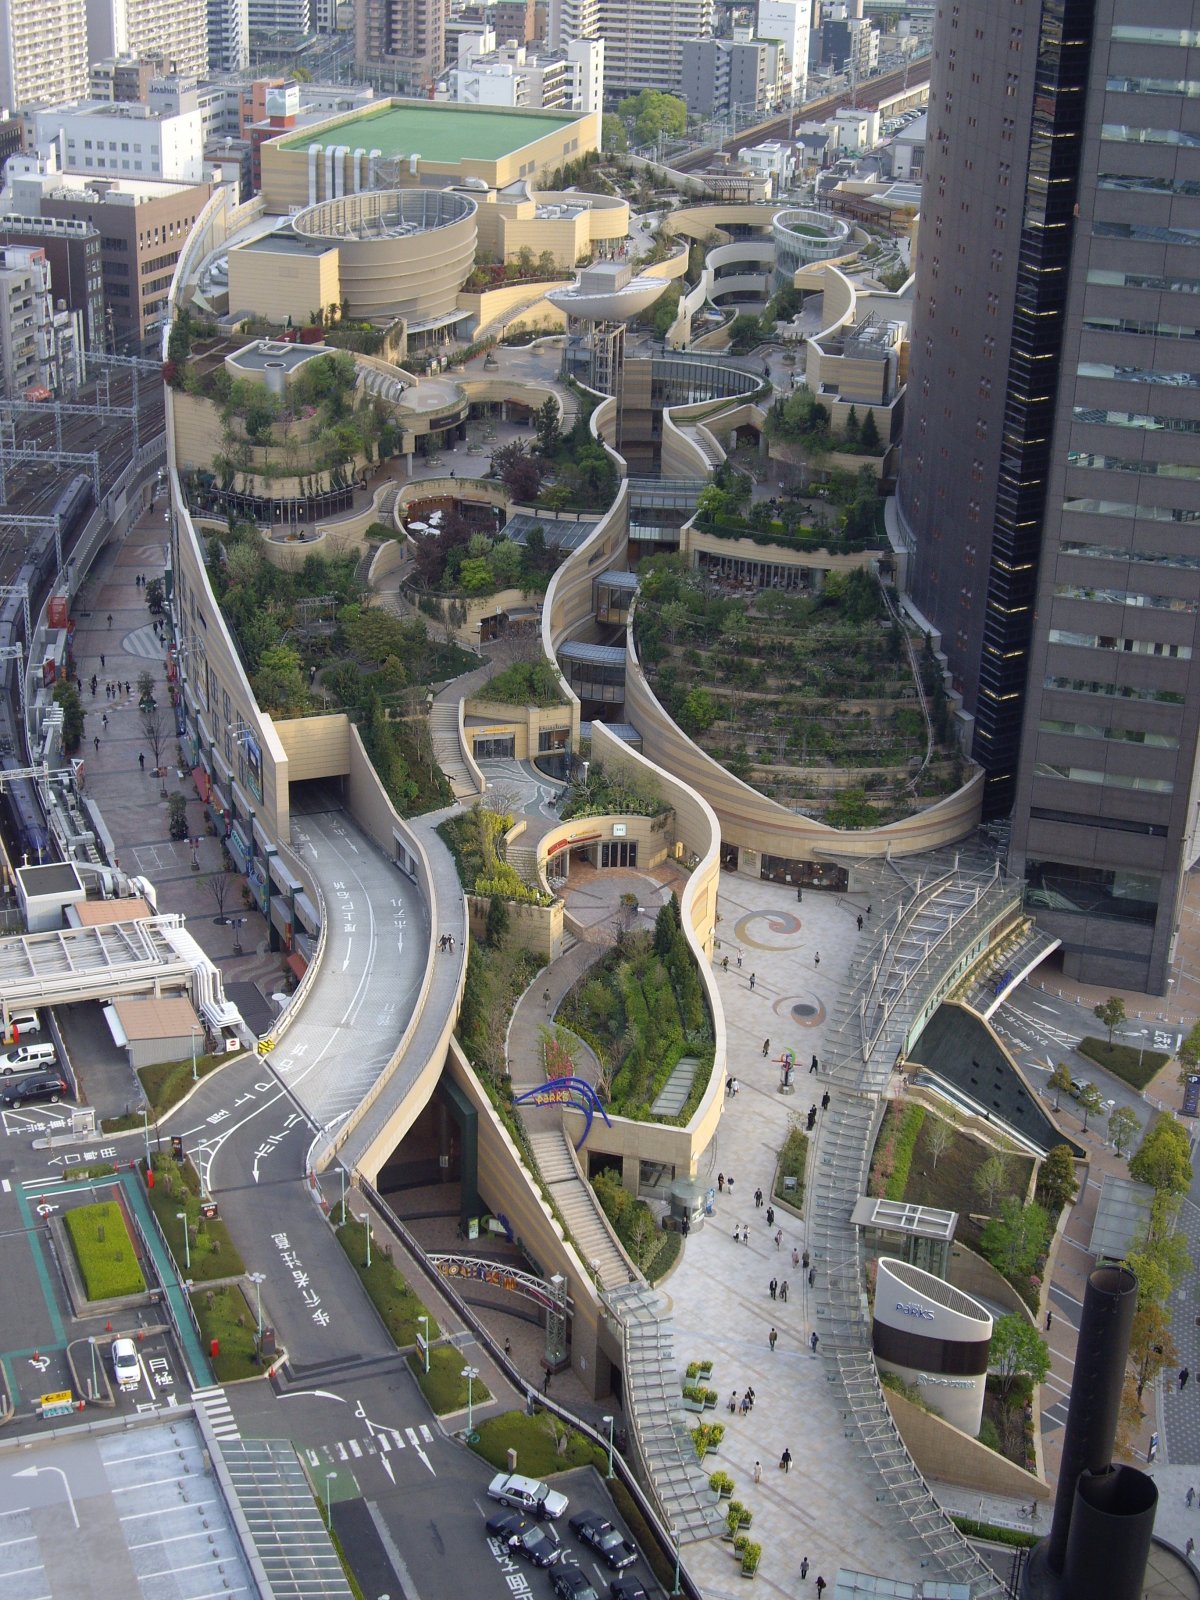 namba-parks-osaka-japan-while-most-city-parks-are-wide-open-fields-providing-escape-these-fascinating-gardens-best-viewed-from-above-are-located-on-top-of-a-shopping-complex